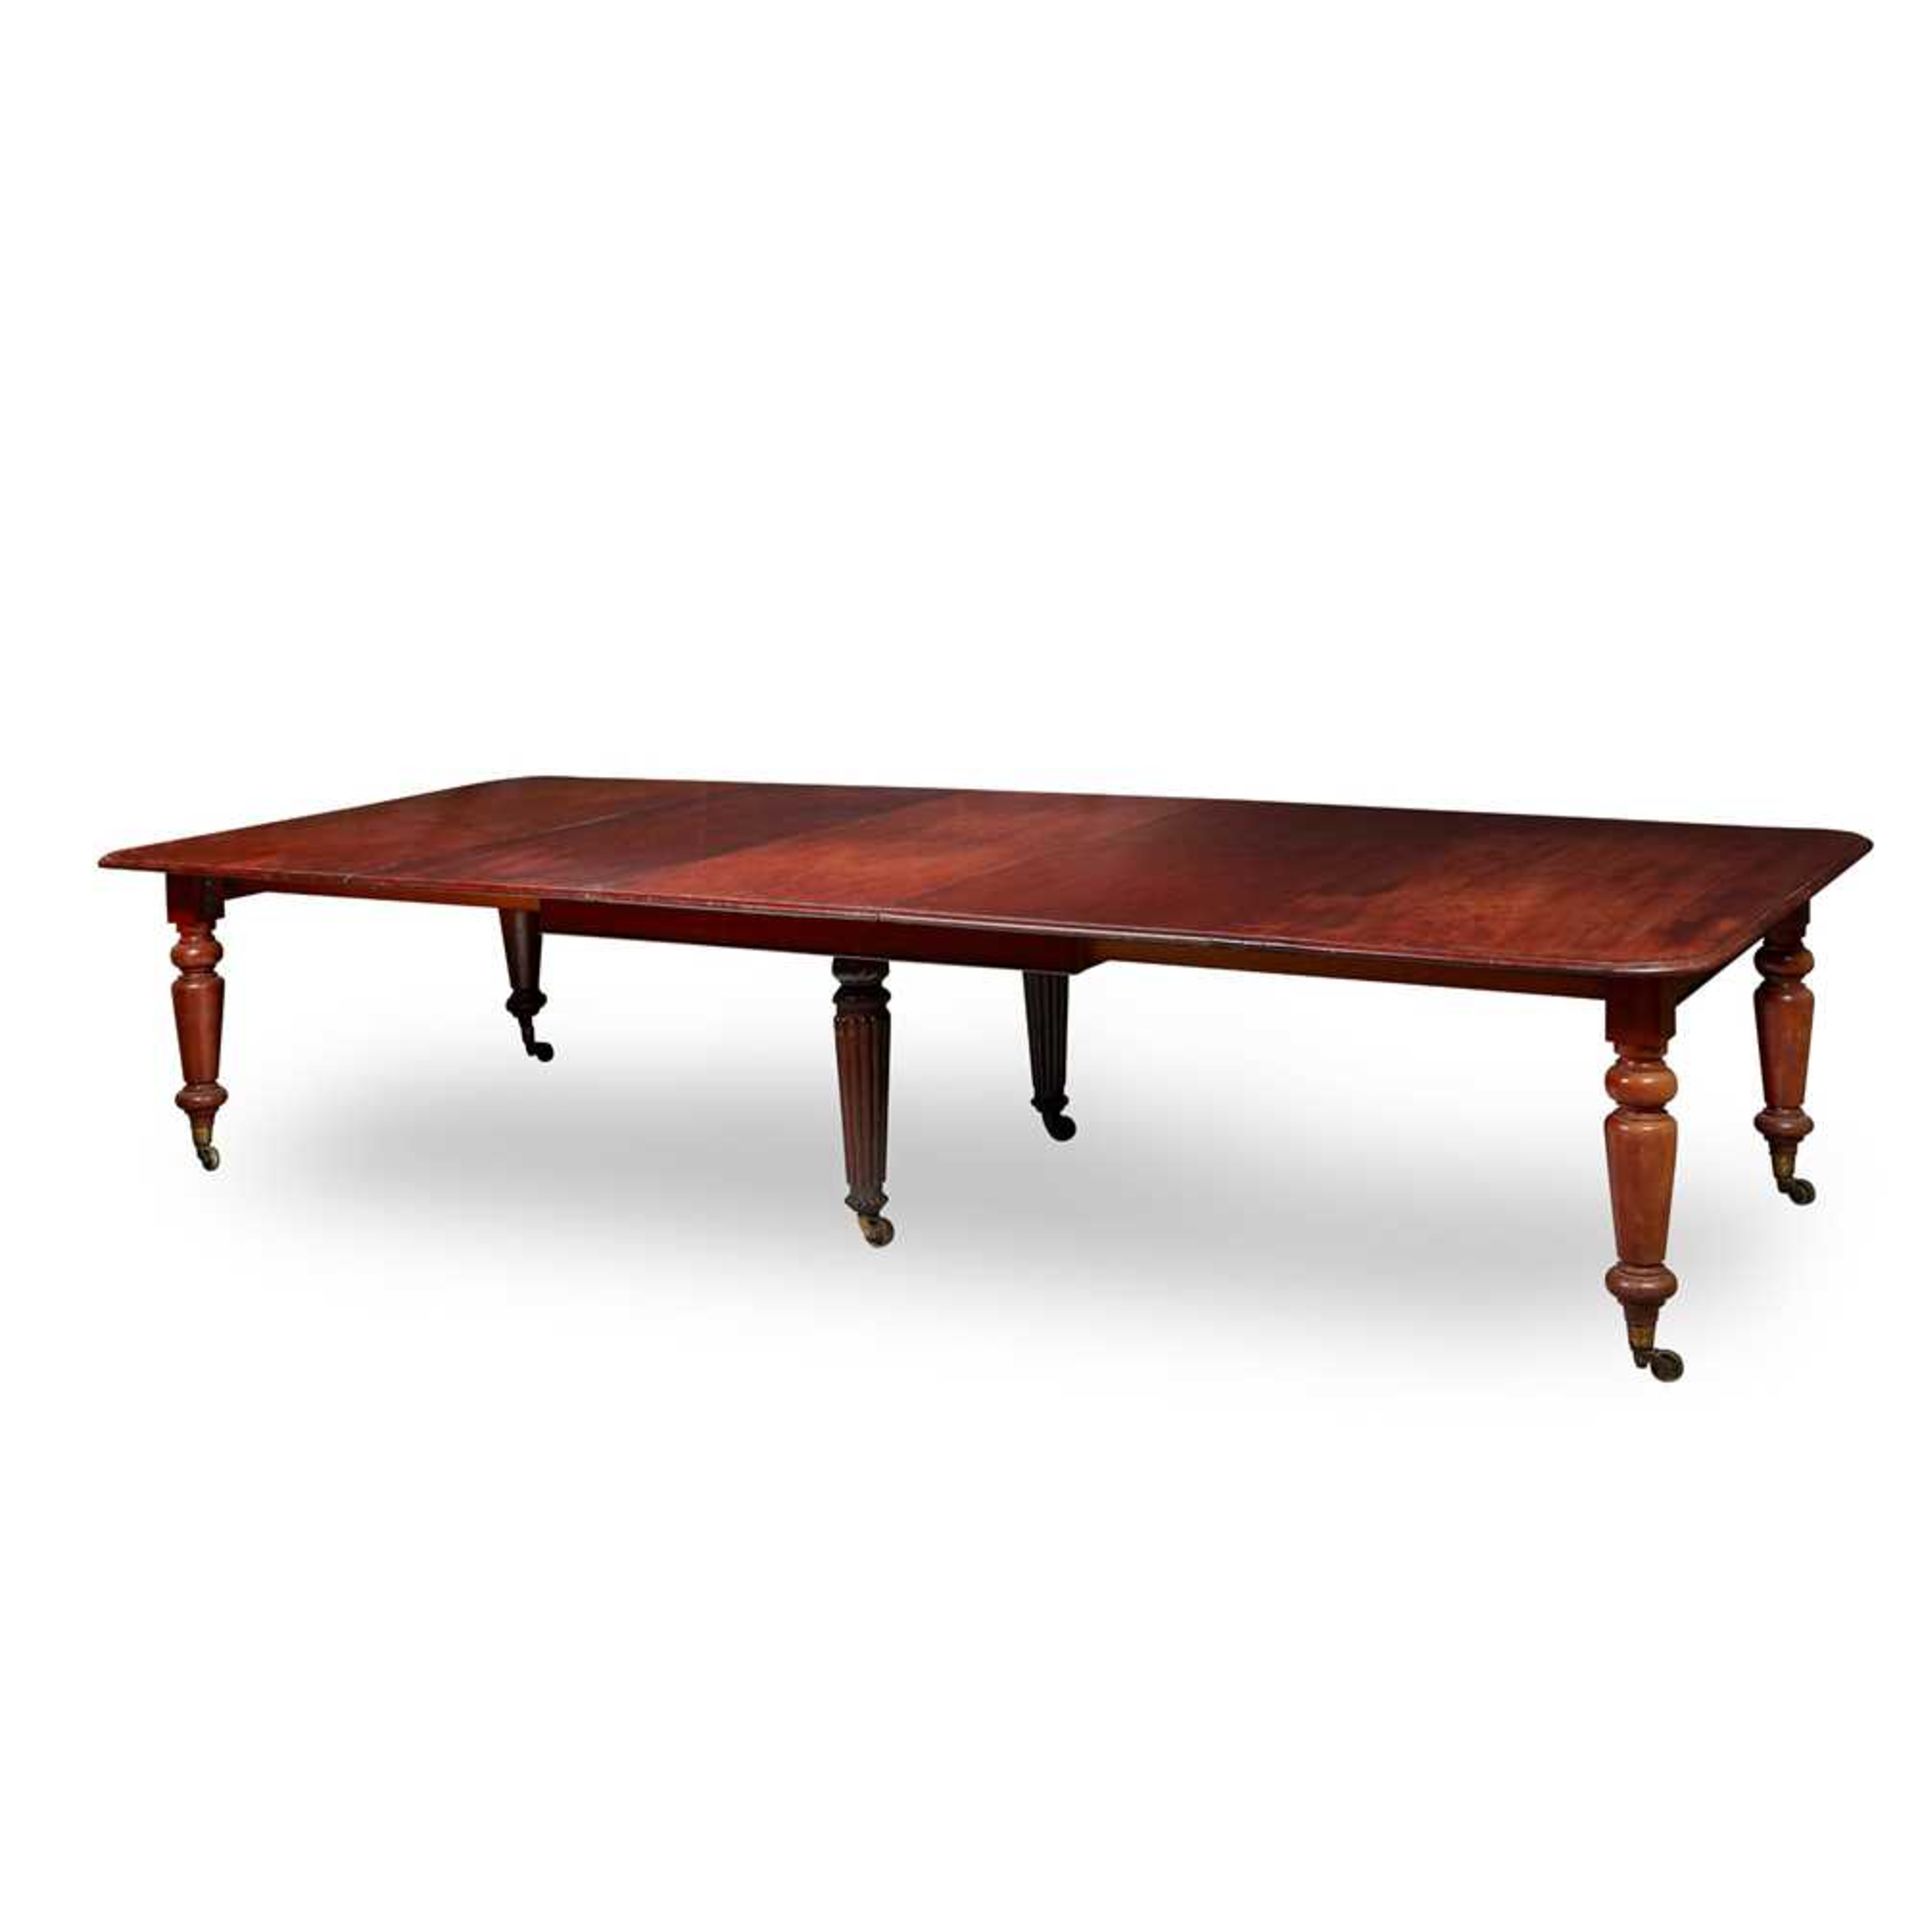 EARLY VICTORIAN MAHOGANY EXTENDING DINING TABLE MID 19TH CENTURY